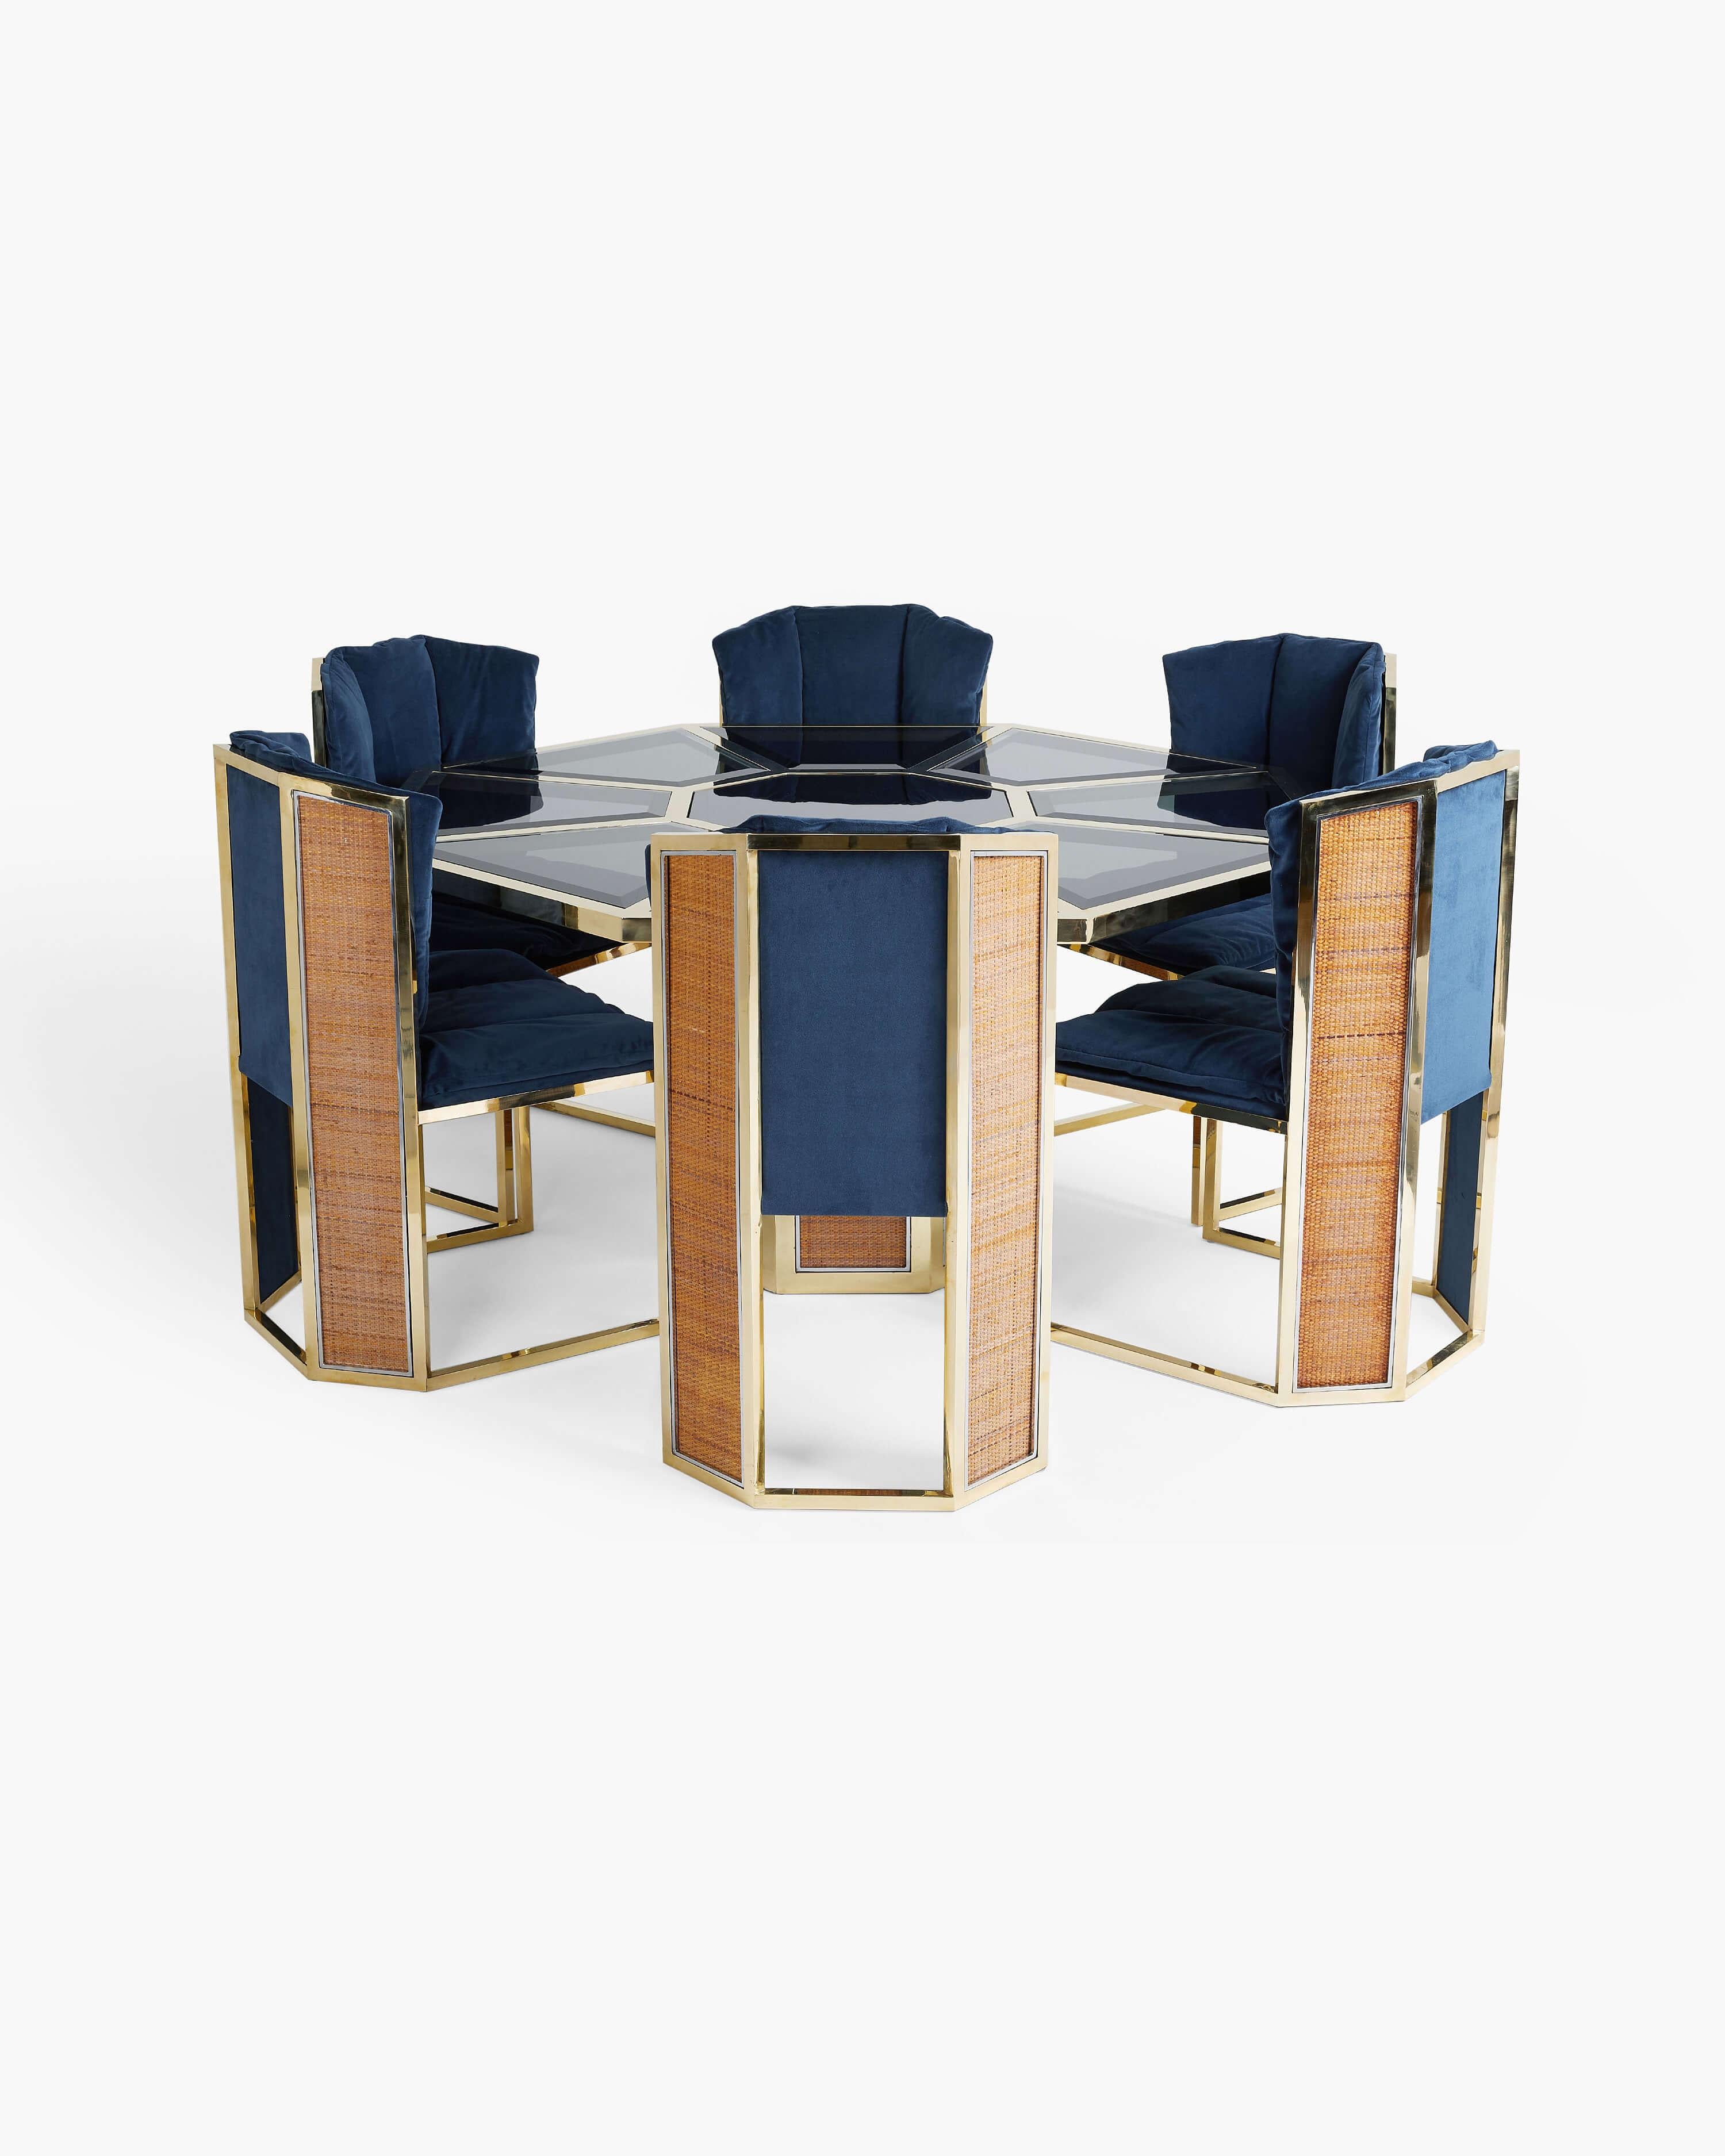 This Topazio Dining set for Mario Sabot combines the eclecticism of the Hollywood Regency design style and the opulence of Art Deco, with sumptuous textures and clean lines. In quintessential Rega-style, this octagonal dining table is built with a